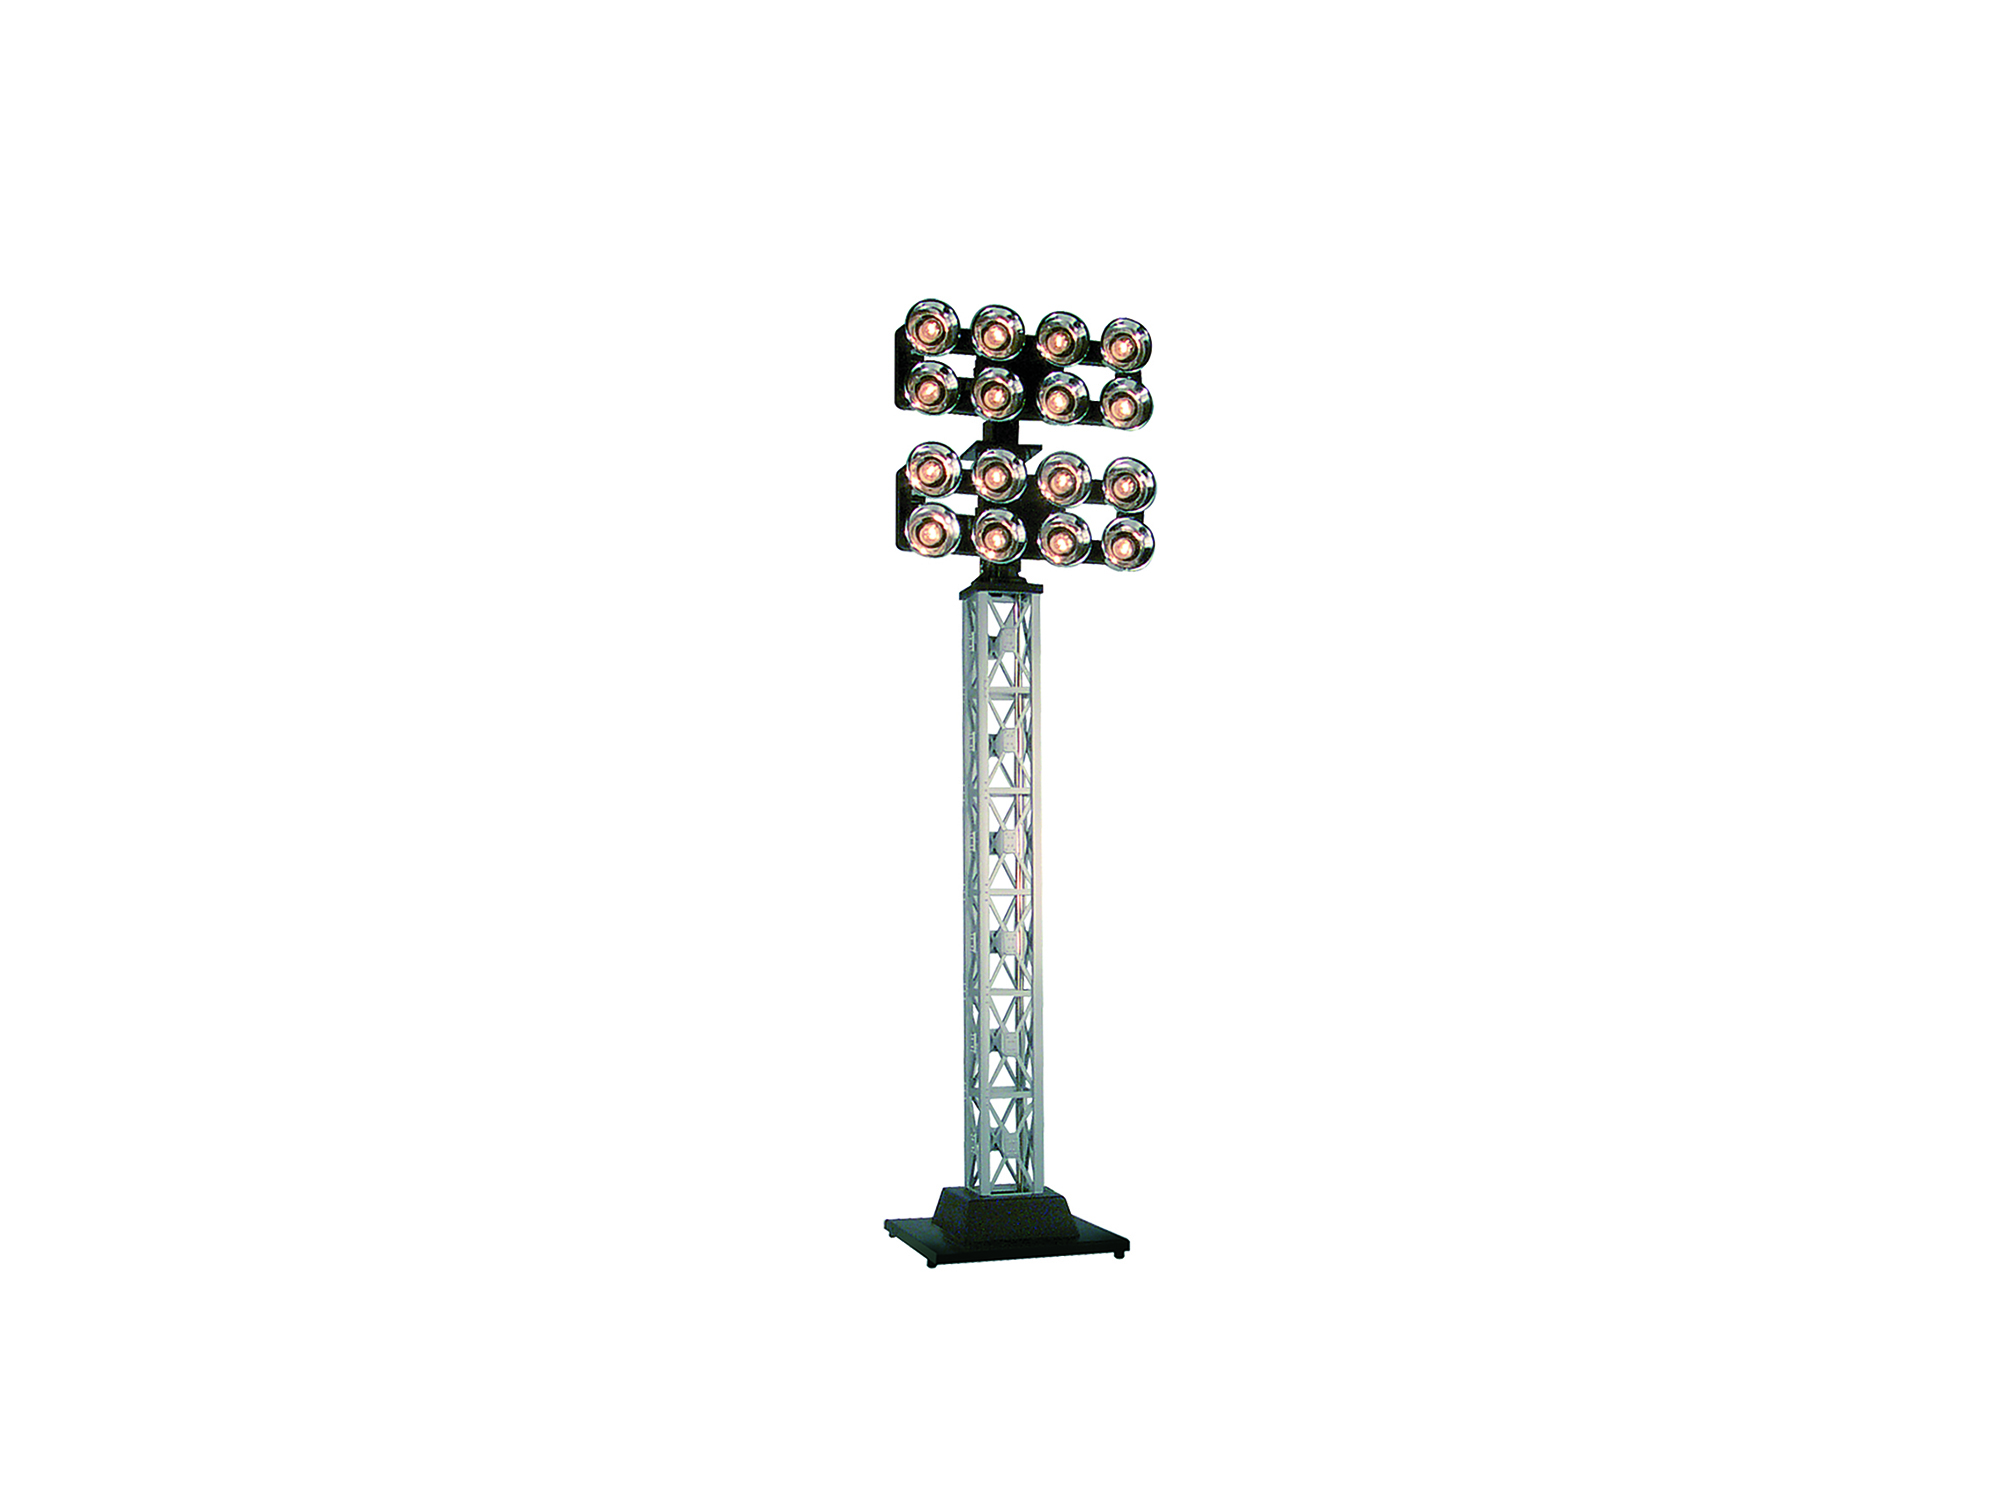 6-82013 DOUBLE FLOODLIGHT TOWER - Click Image to Close